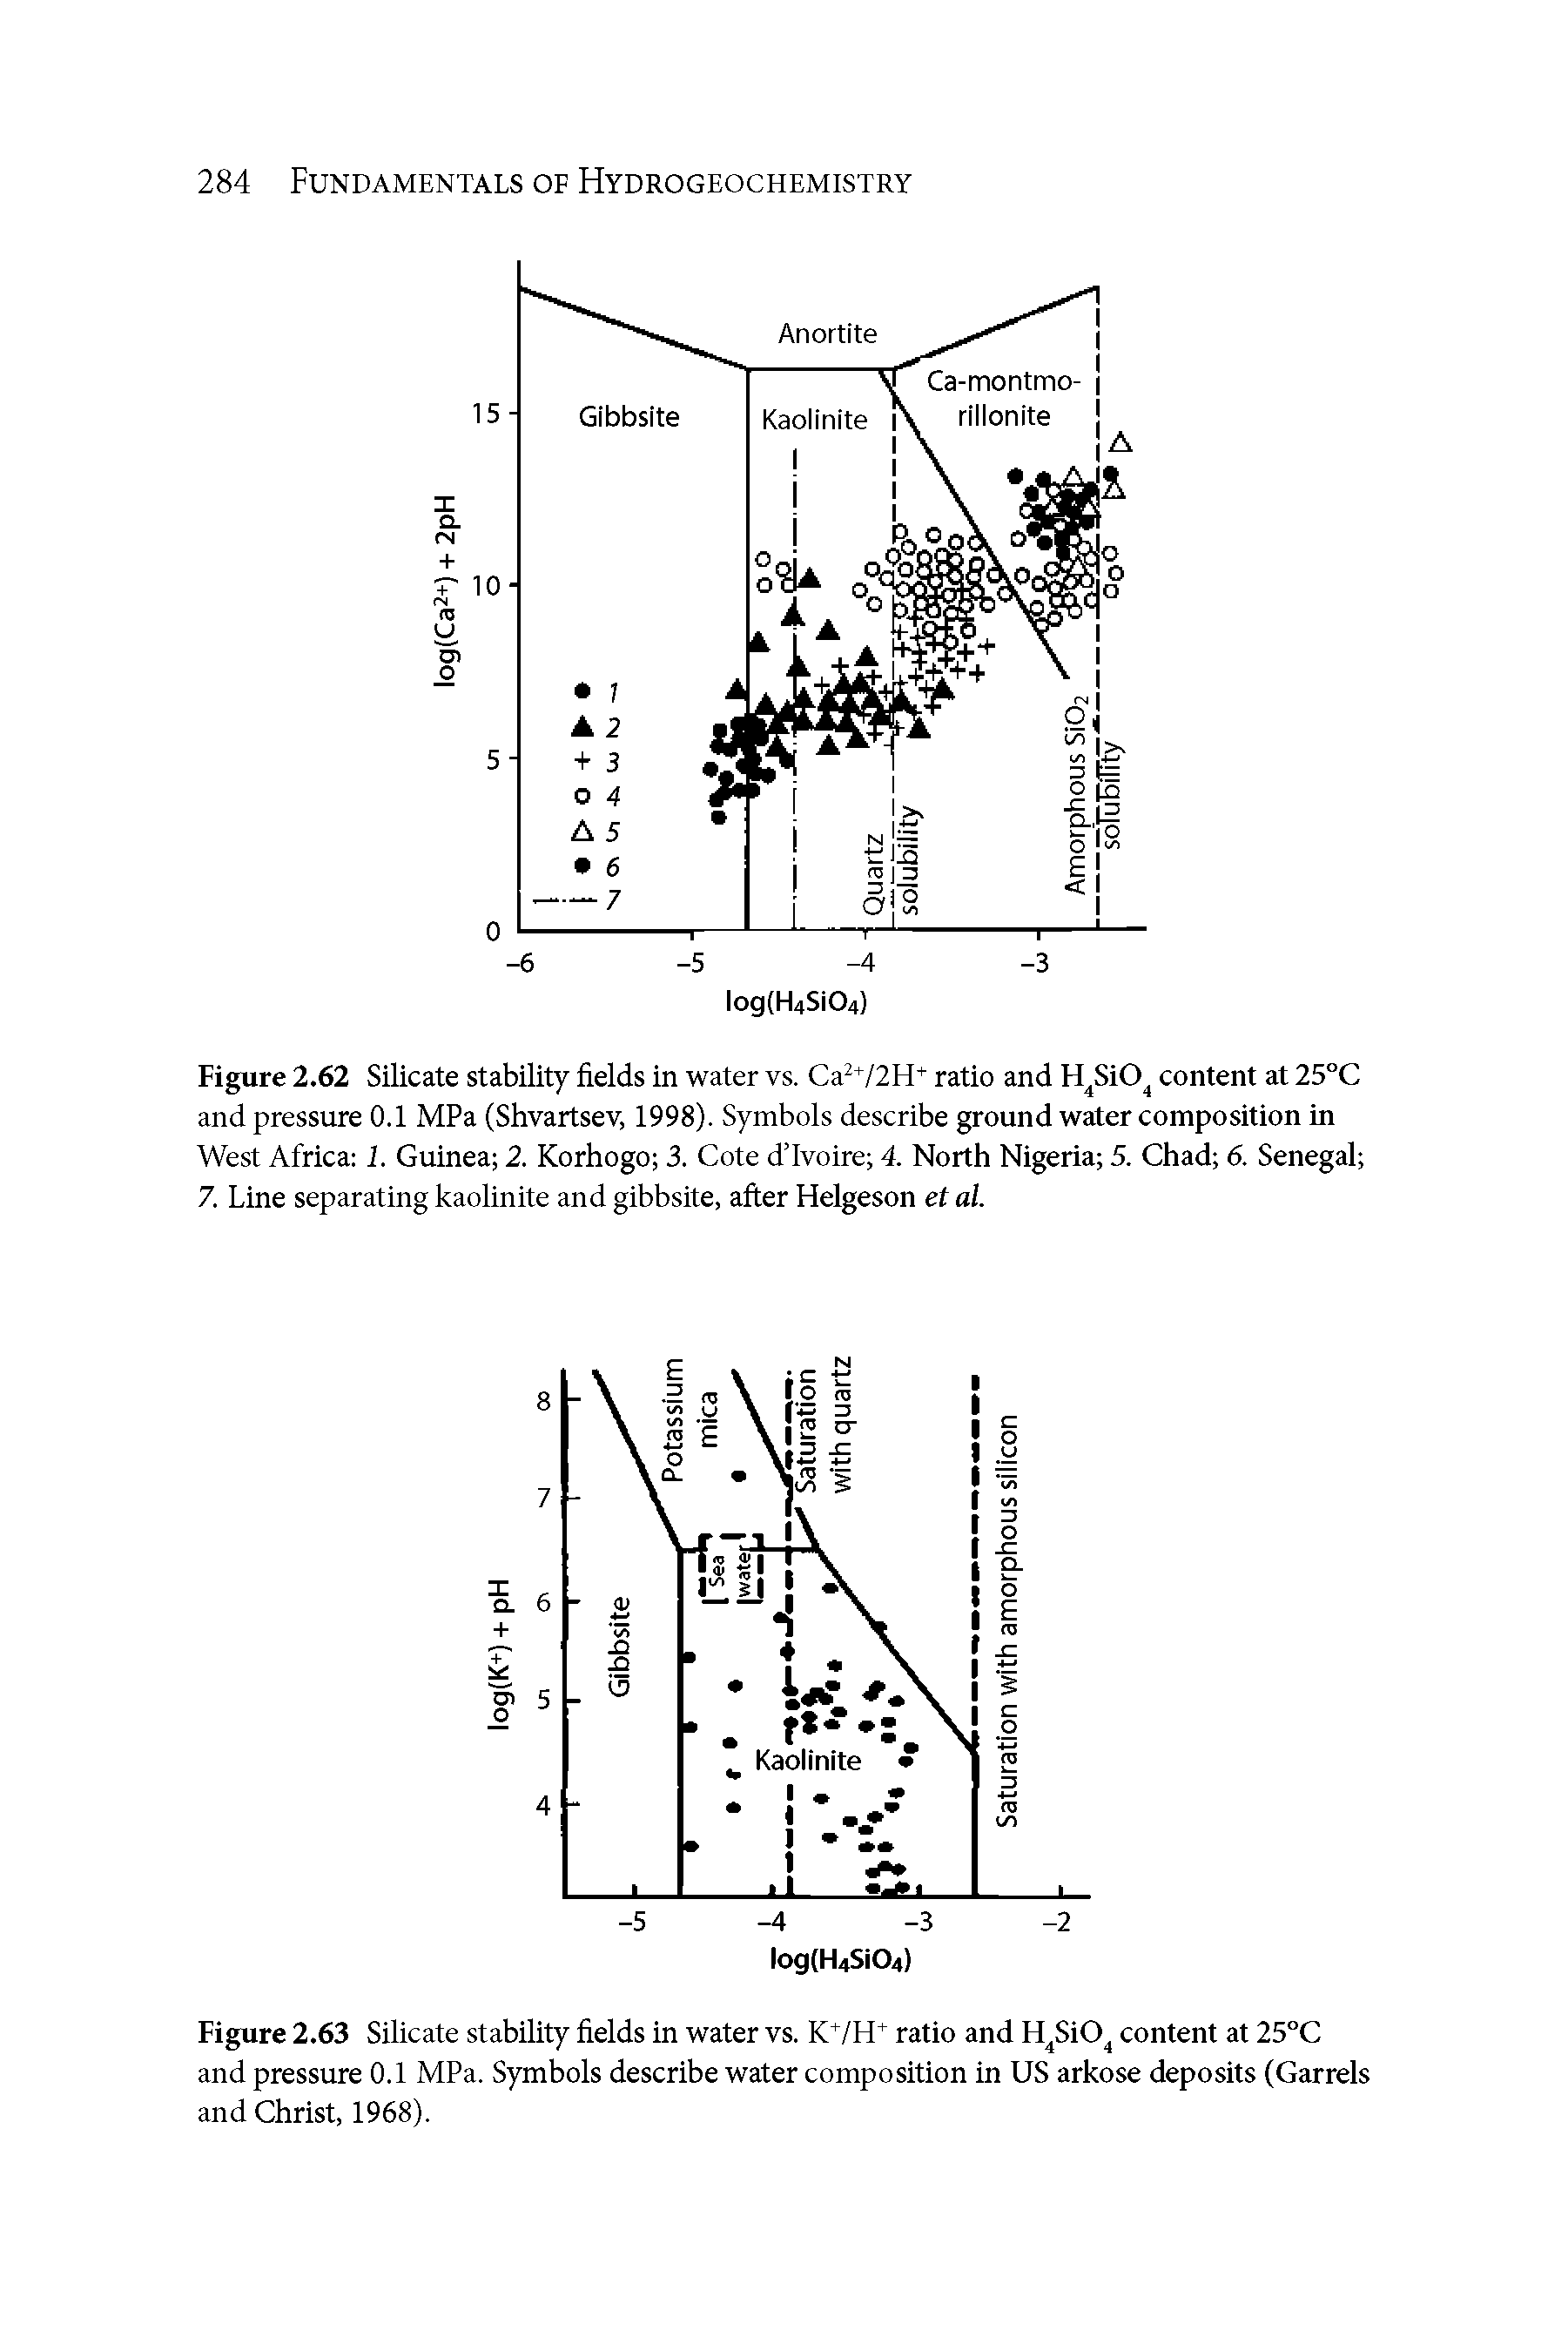 Figure 2.62 Silicate stability fields in water vs. Ca +/2H ratio and H SiO content at 25 C and pressure 0.1 MPa (Shvartsev, 1998). Symbols describe ground water composition in West Africa 1. Guinea 2. Korhogo 3. Cote d Ivoire 4. North Nigeria 5. Chad 6. Senegal 7. Line separating kaolinite and gibbsite, after Helgeson et al.